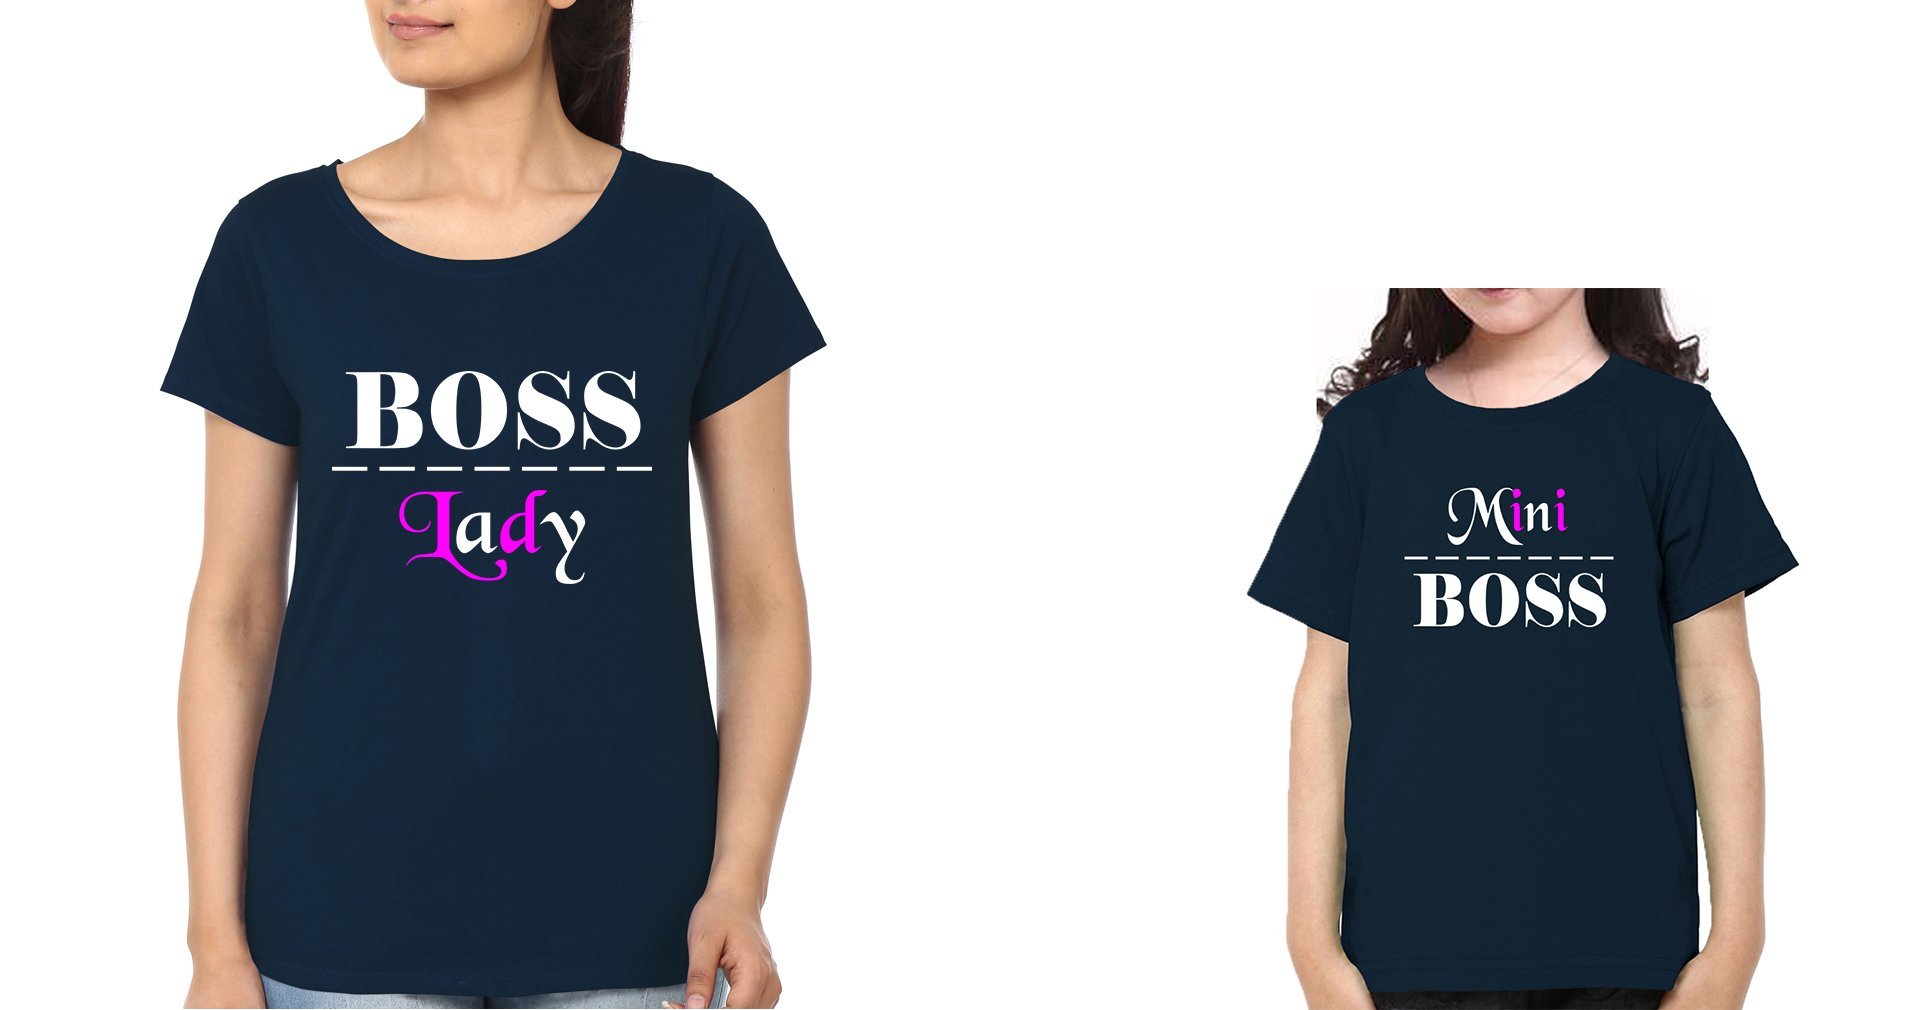 Boss Lady & Mini Boss Mother and Daughter Matching T-Shirt- FunkyTradition - FunkyTradition